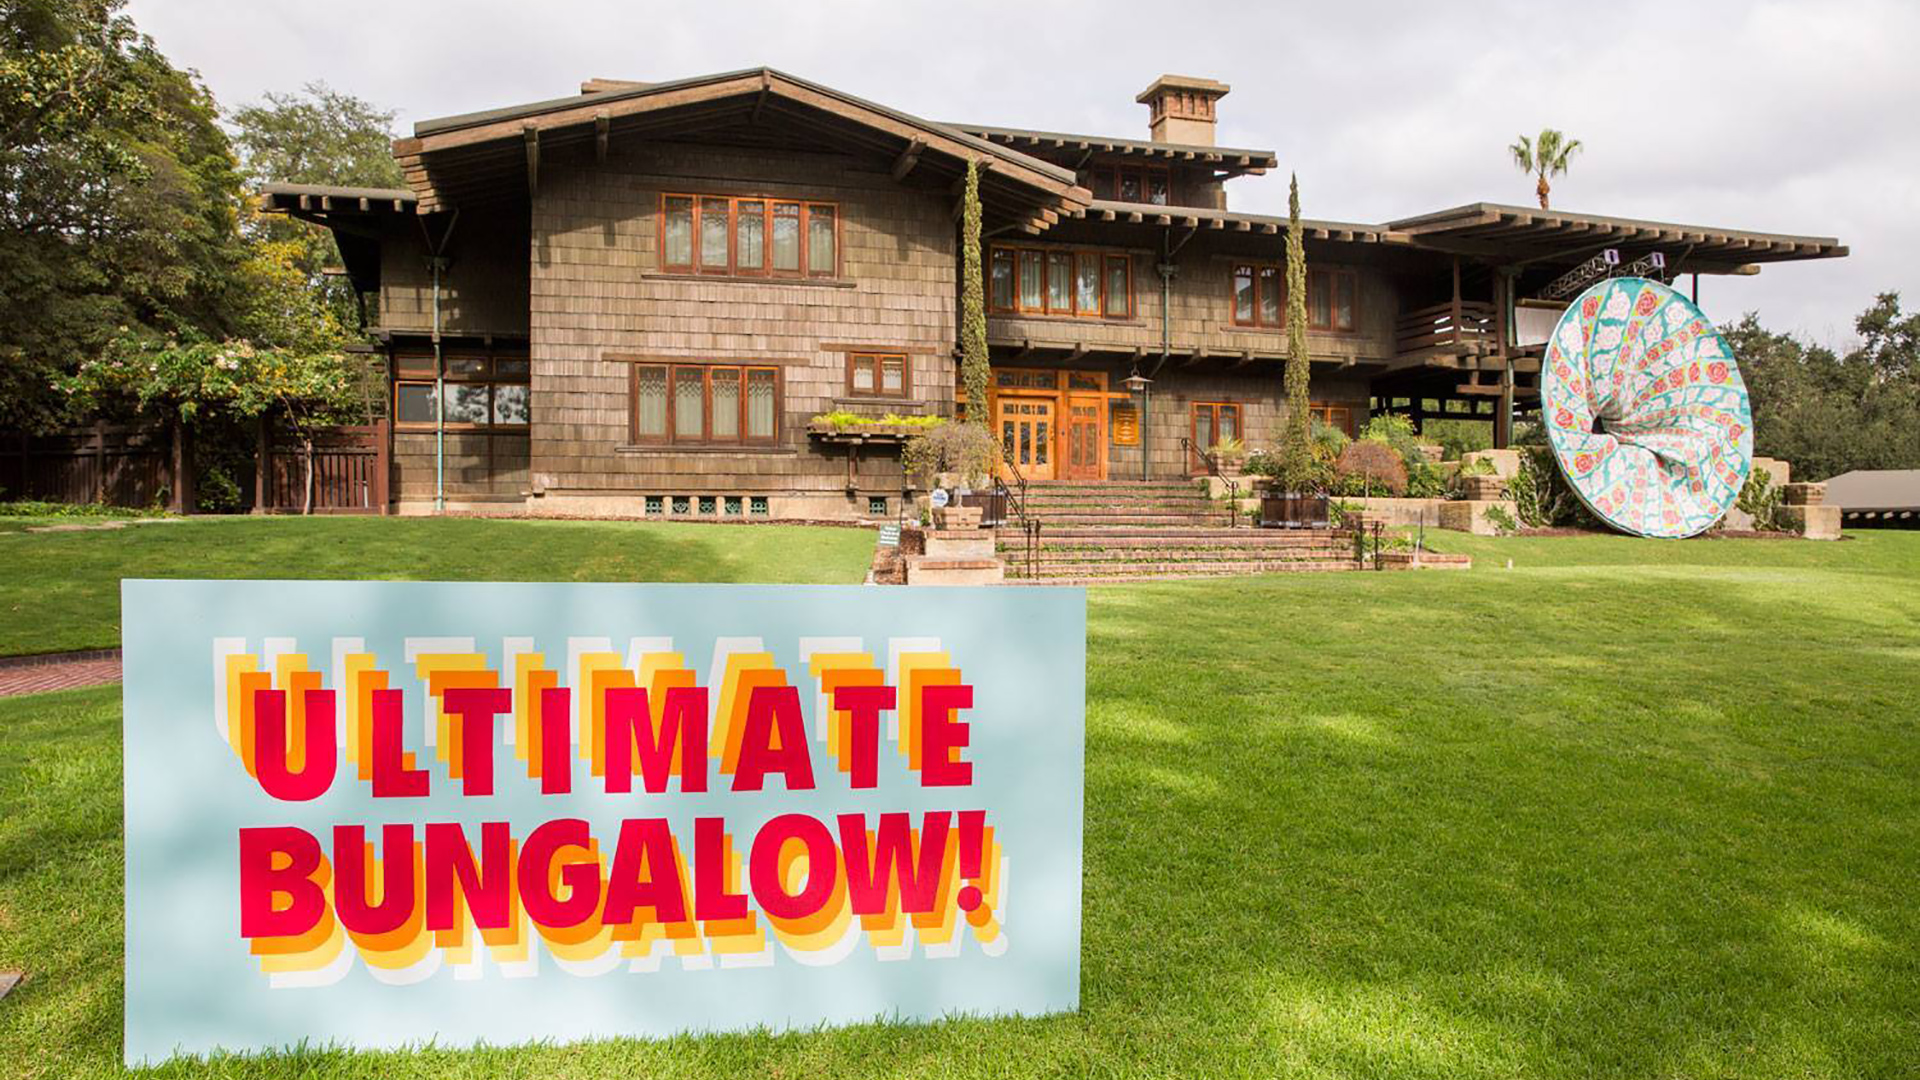 Sign that reads "Ultimate Bungalow" on lawn of Pasadena's Gamble House.